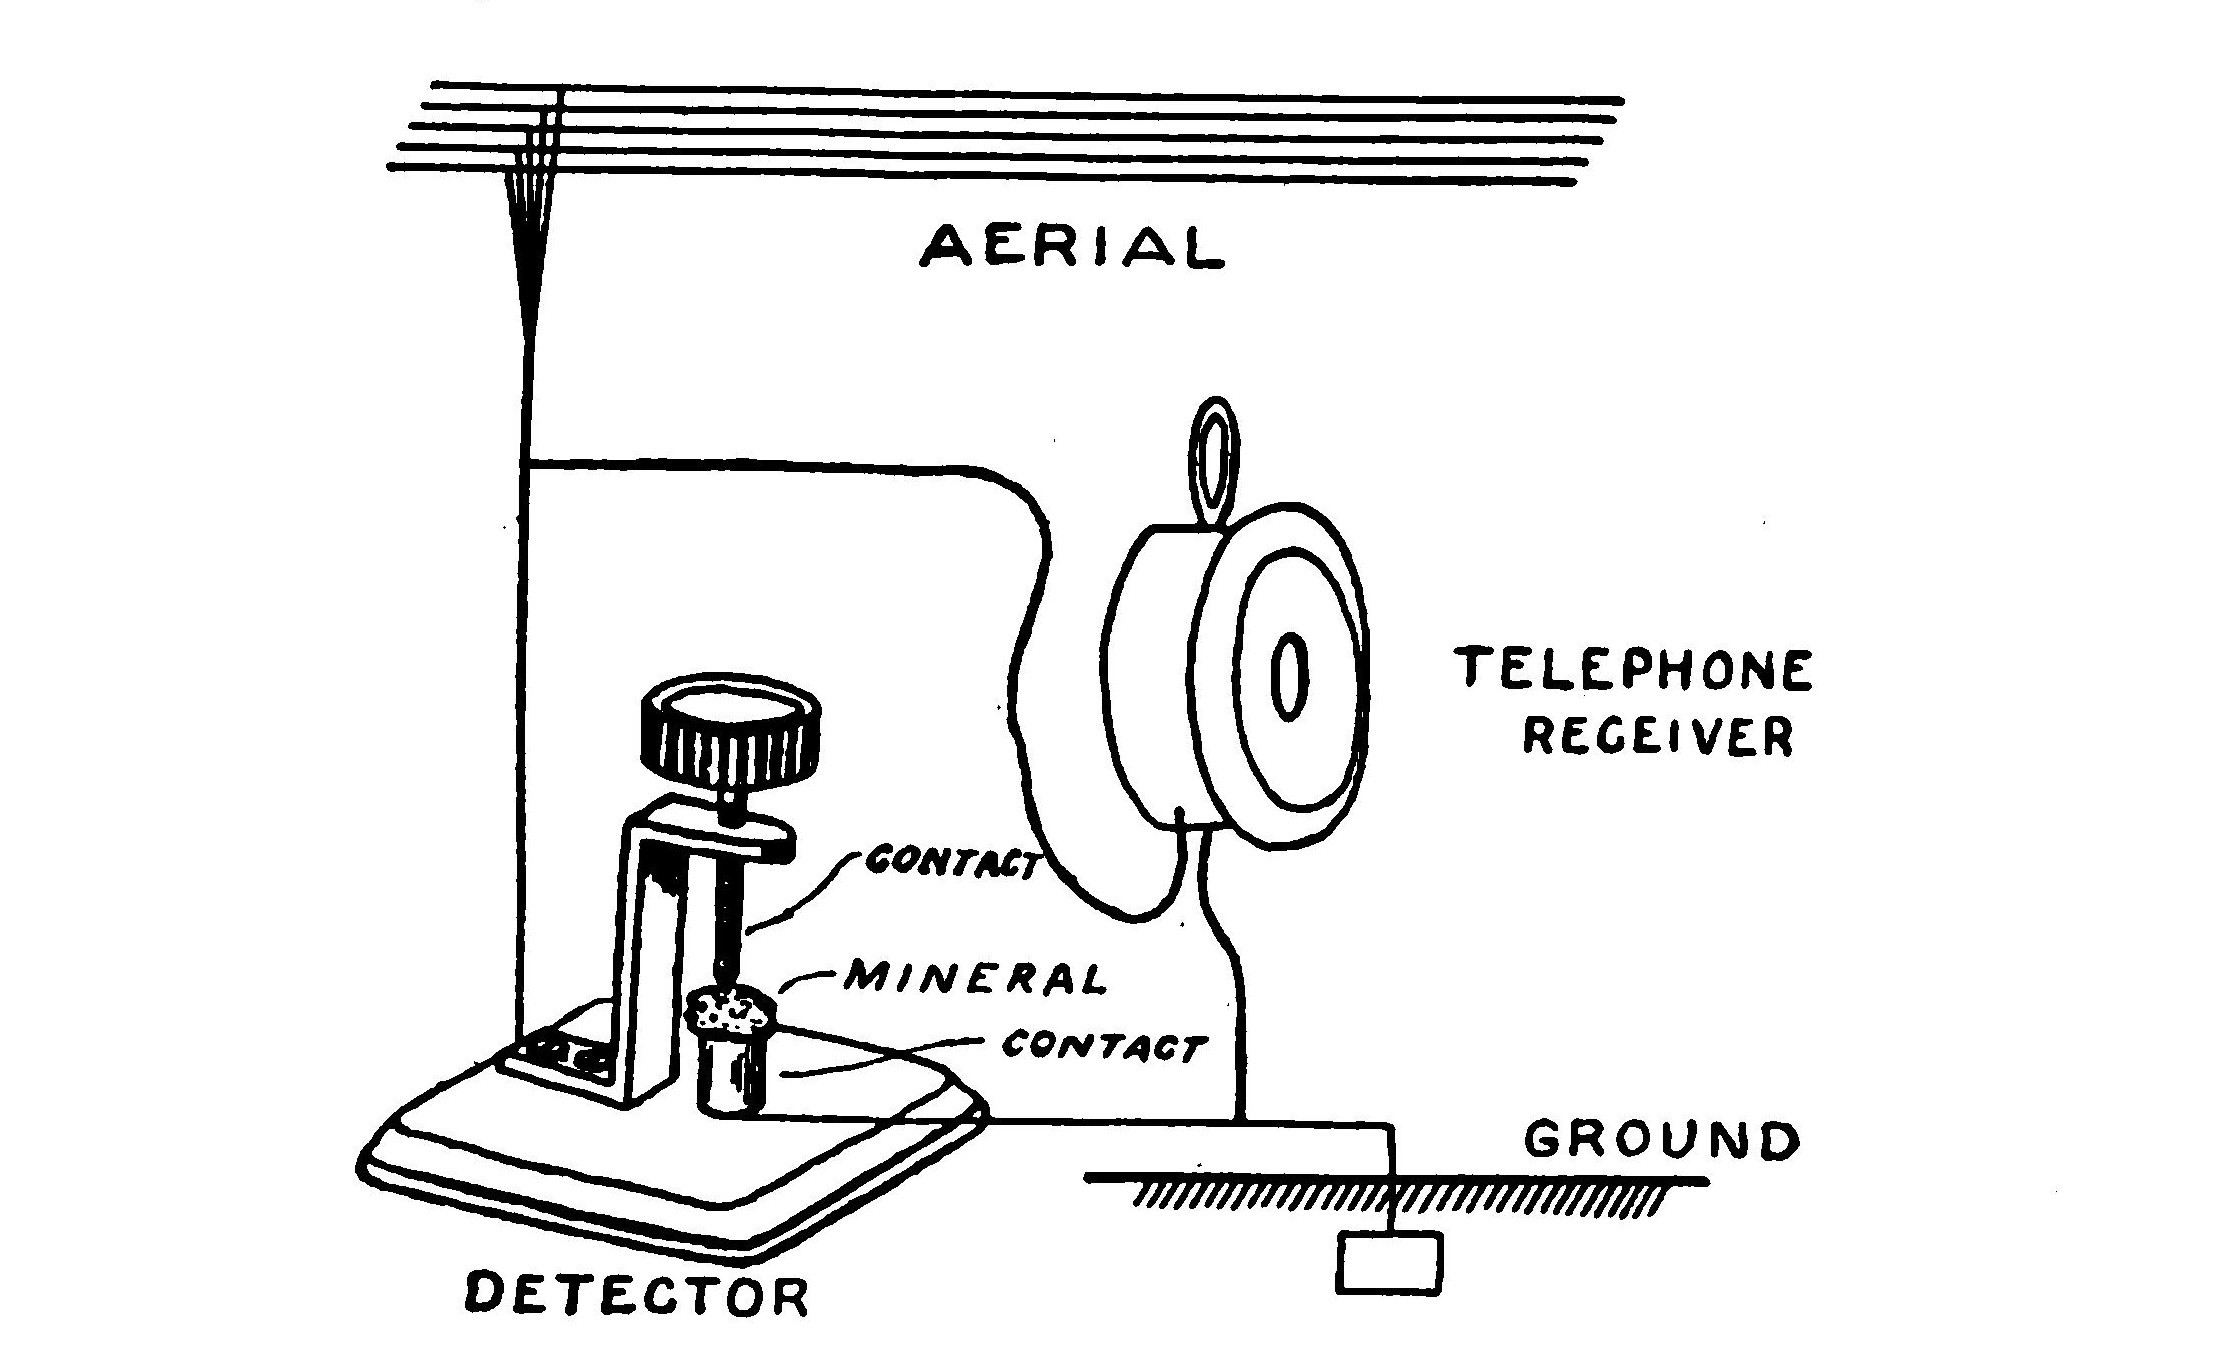 FIG. 10.—A simple receiving arrangement. The detector rectifies the oscillatory currents passing from the aerial to the ground so that they will flow through the telephone receiver and register as sound.